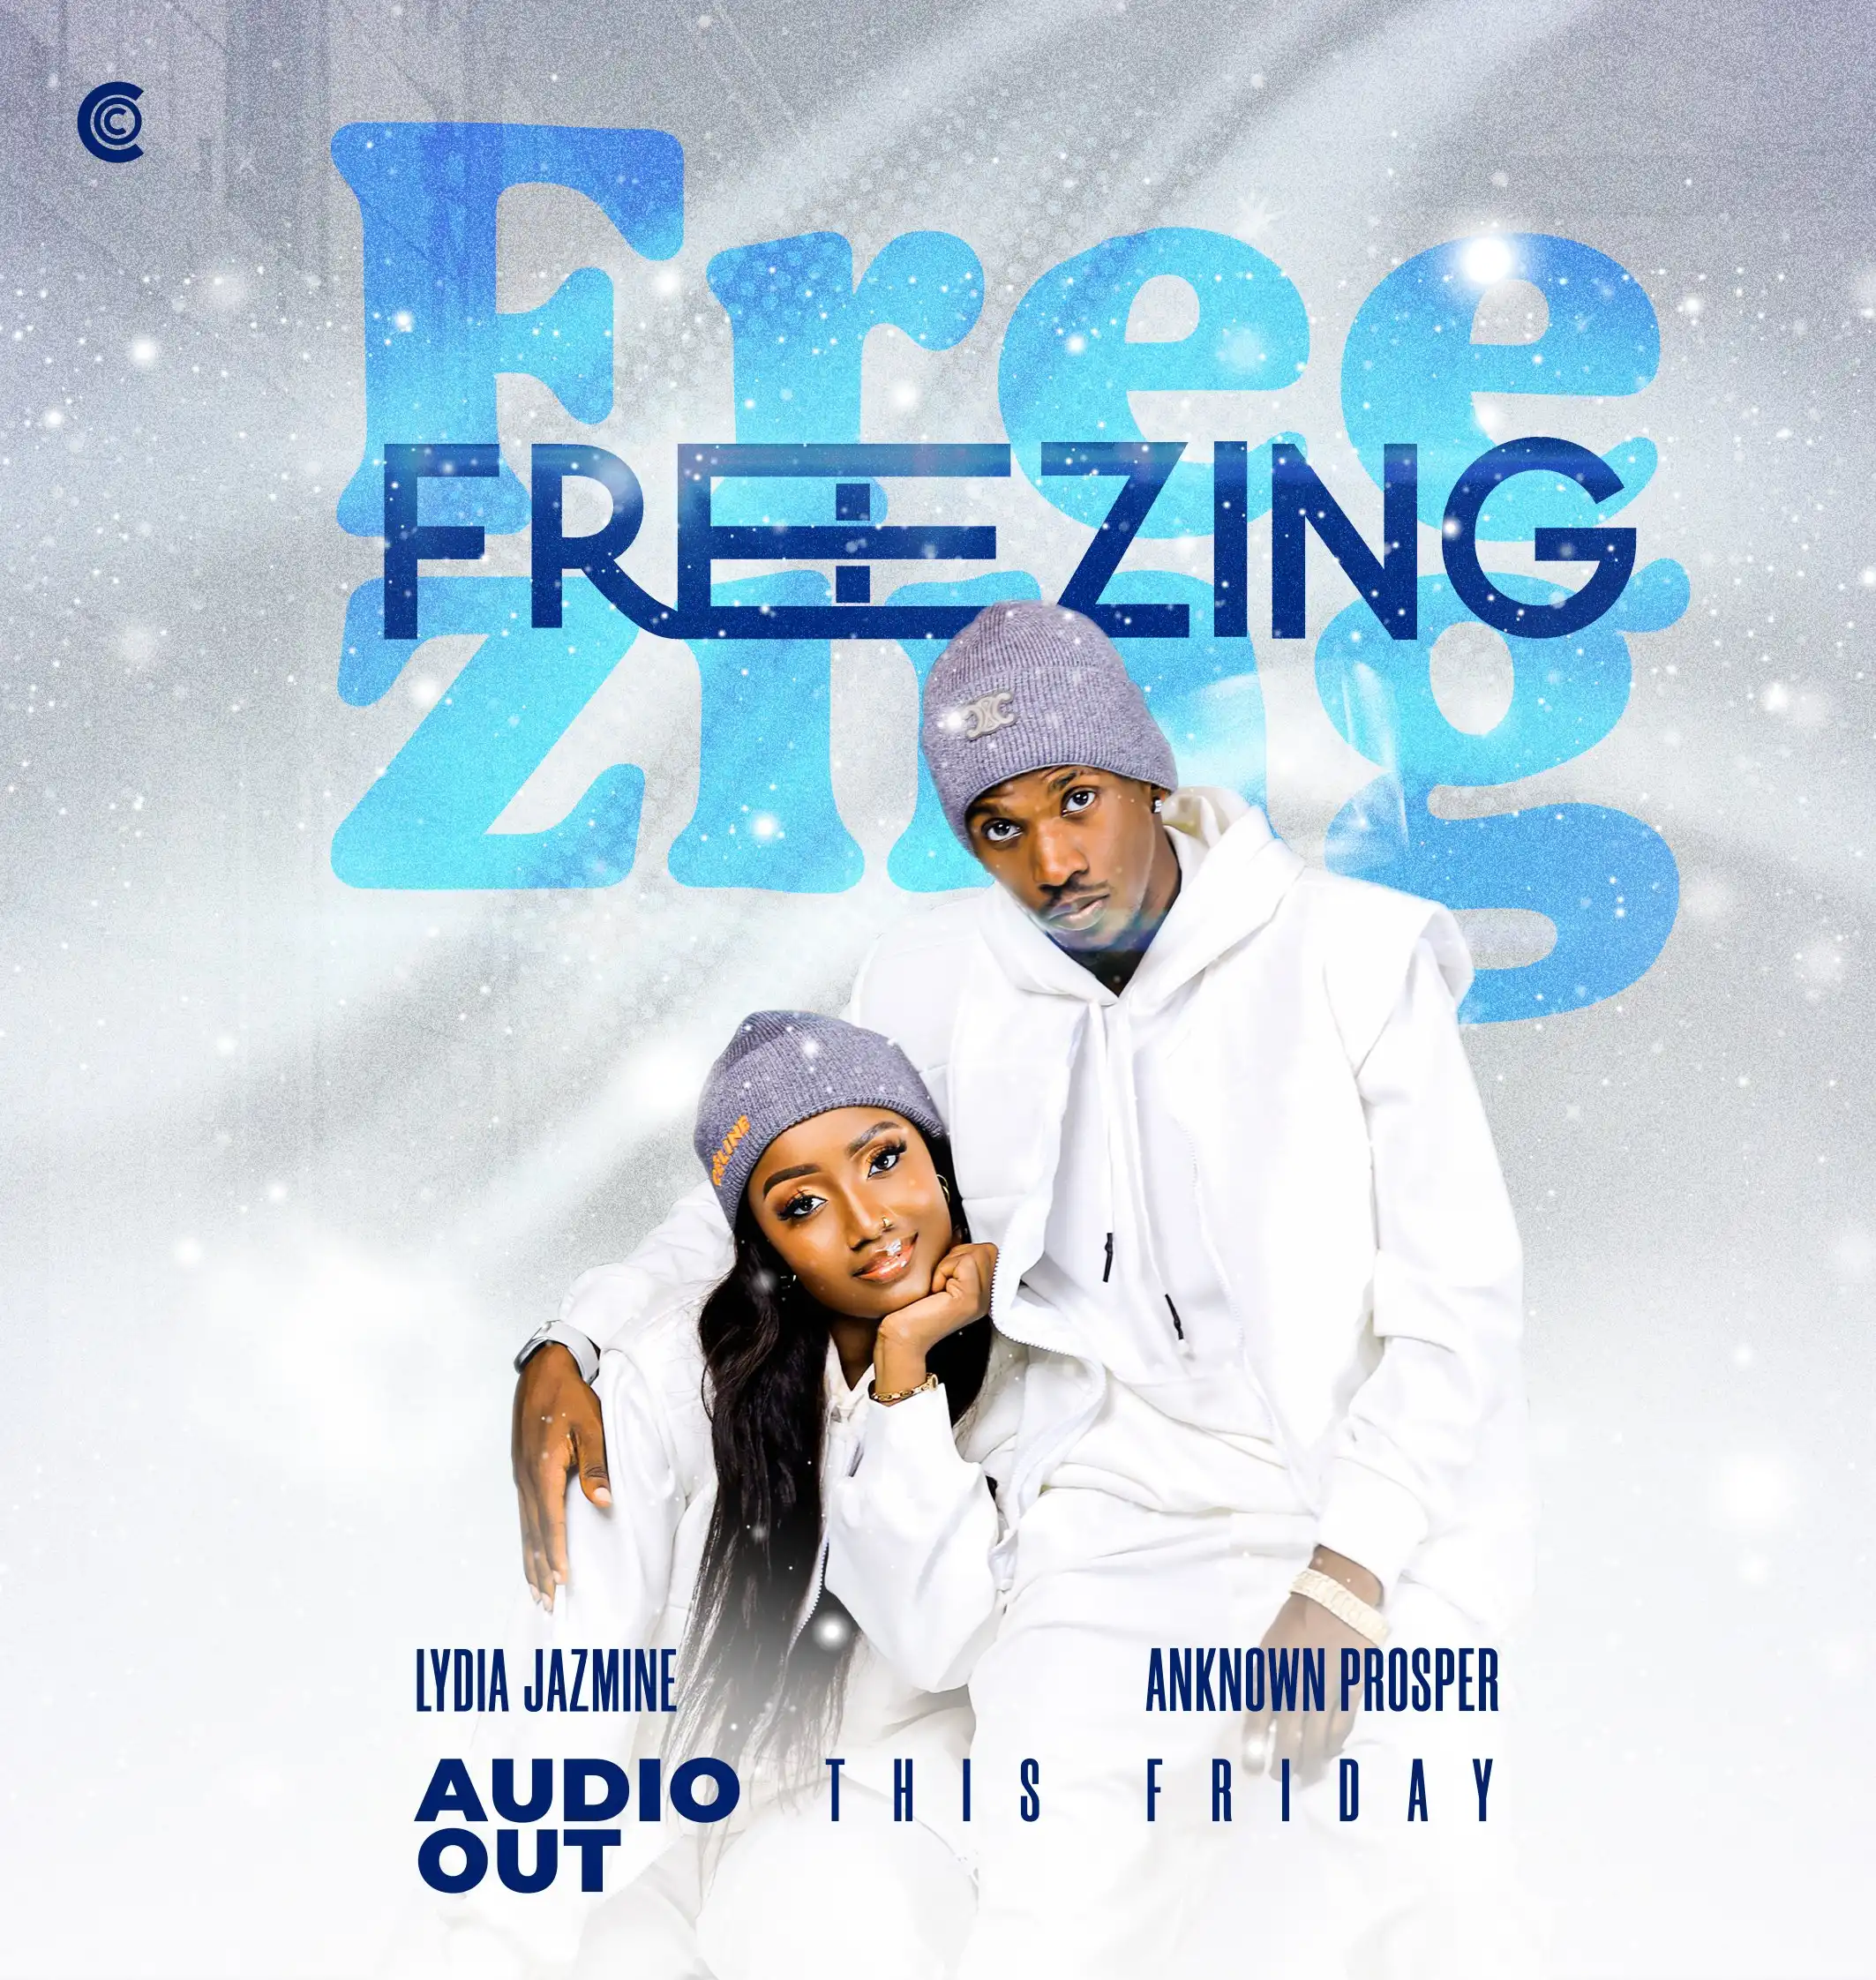 an-known-freezing-album-cover